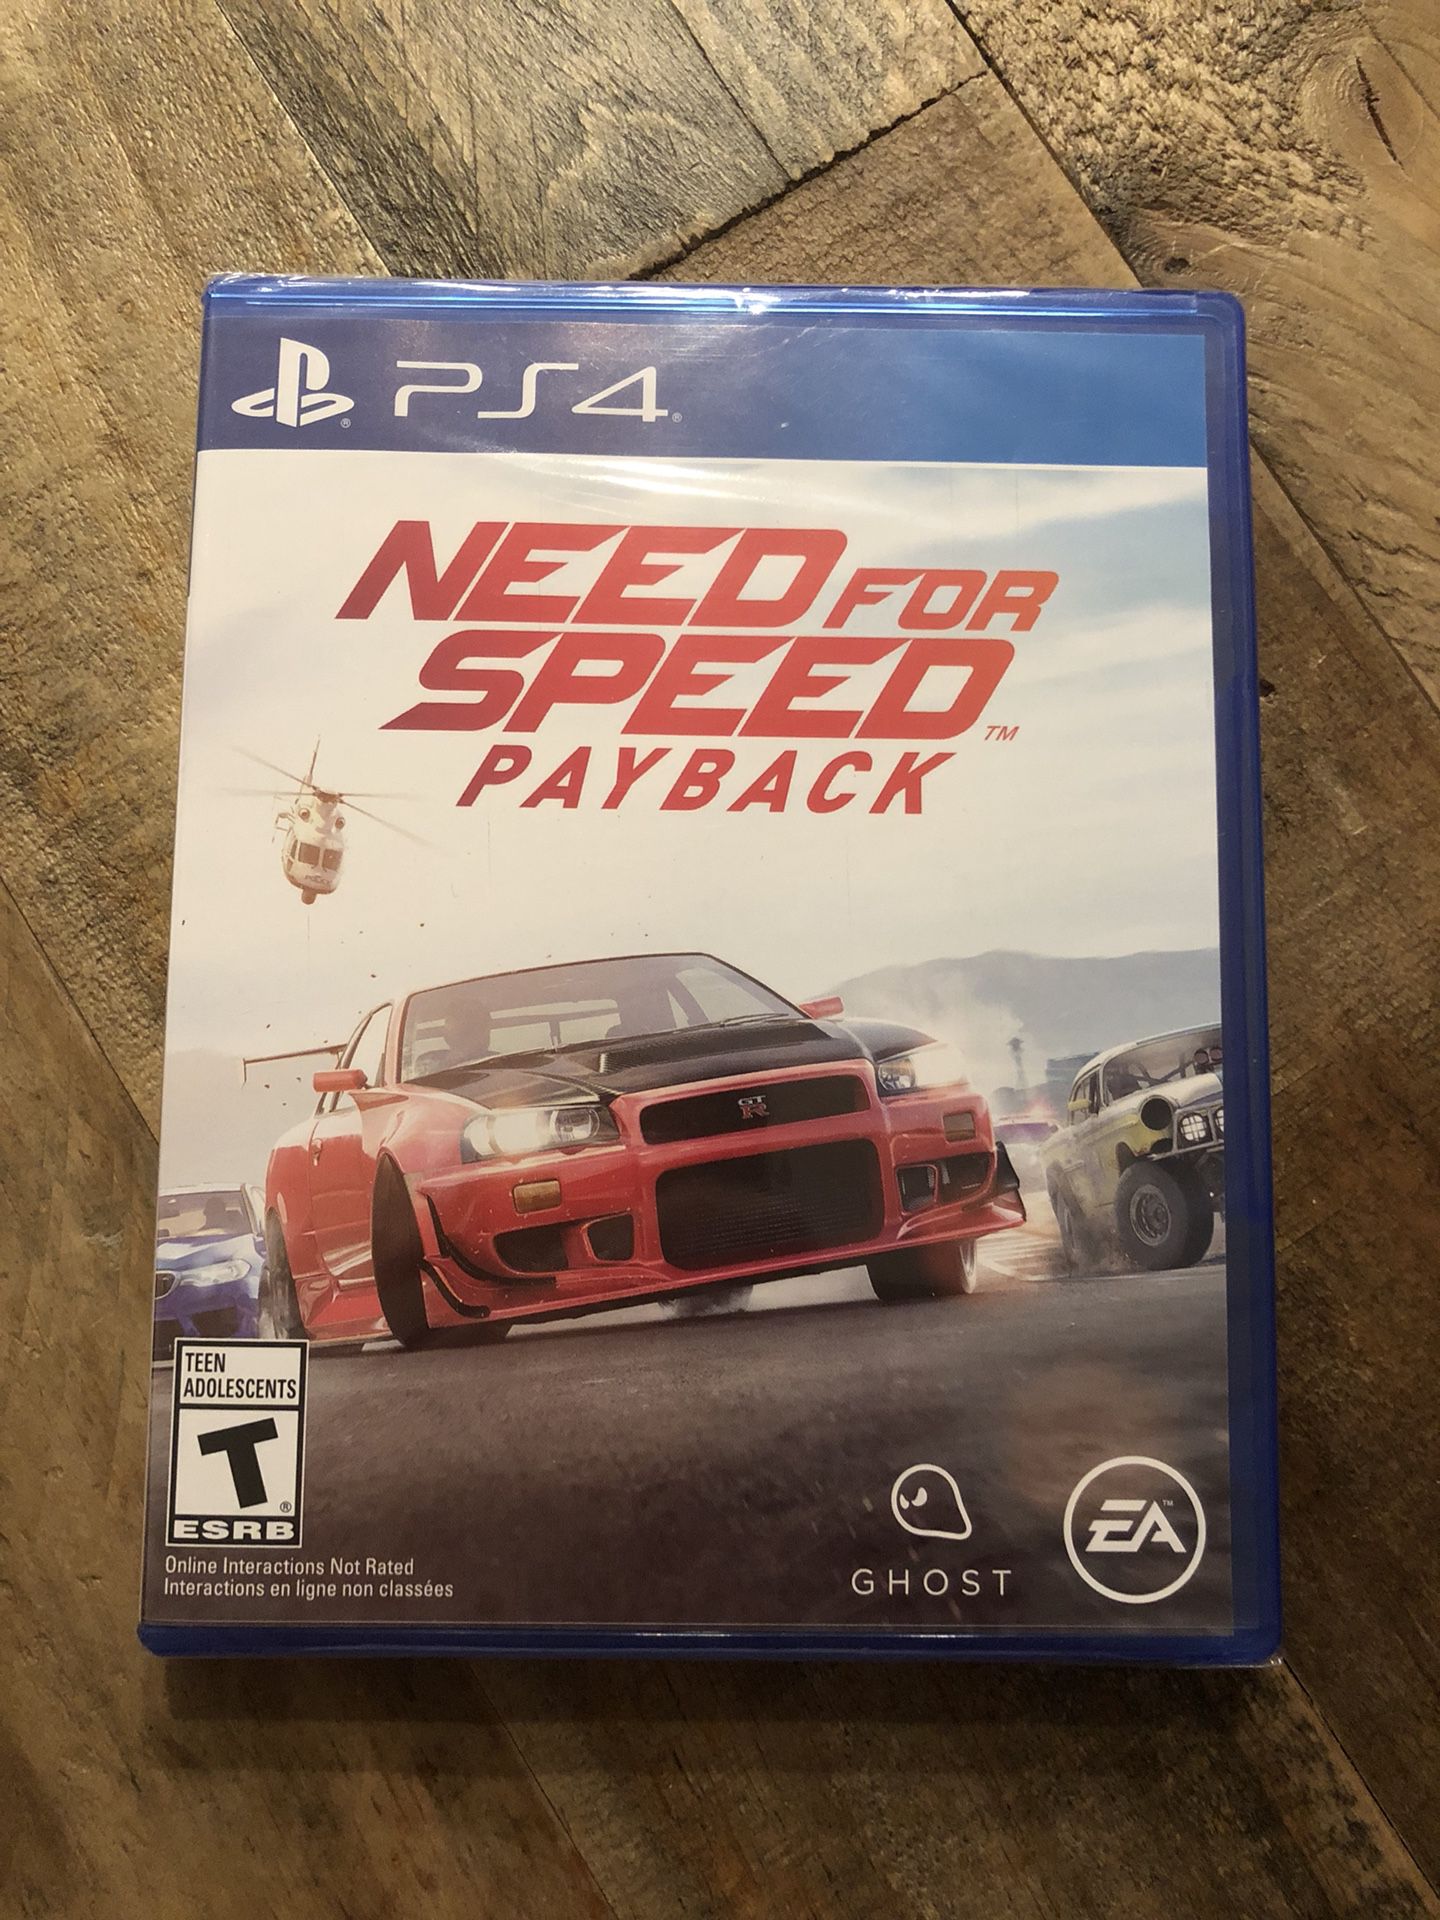 PS4 PlayStation 4 Pro Need For Speed New/Sealed in Hills, CA - OfferUp